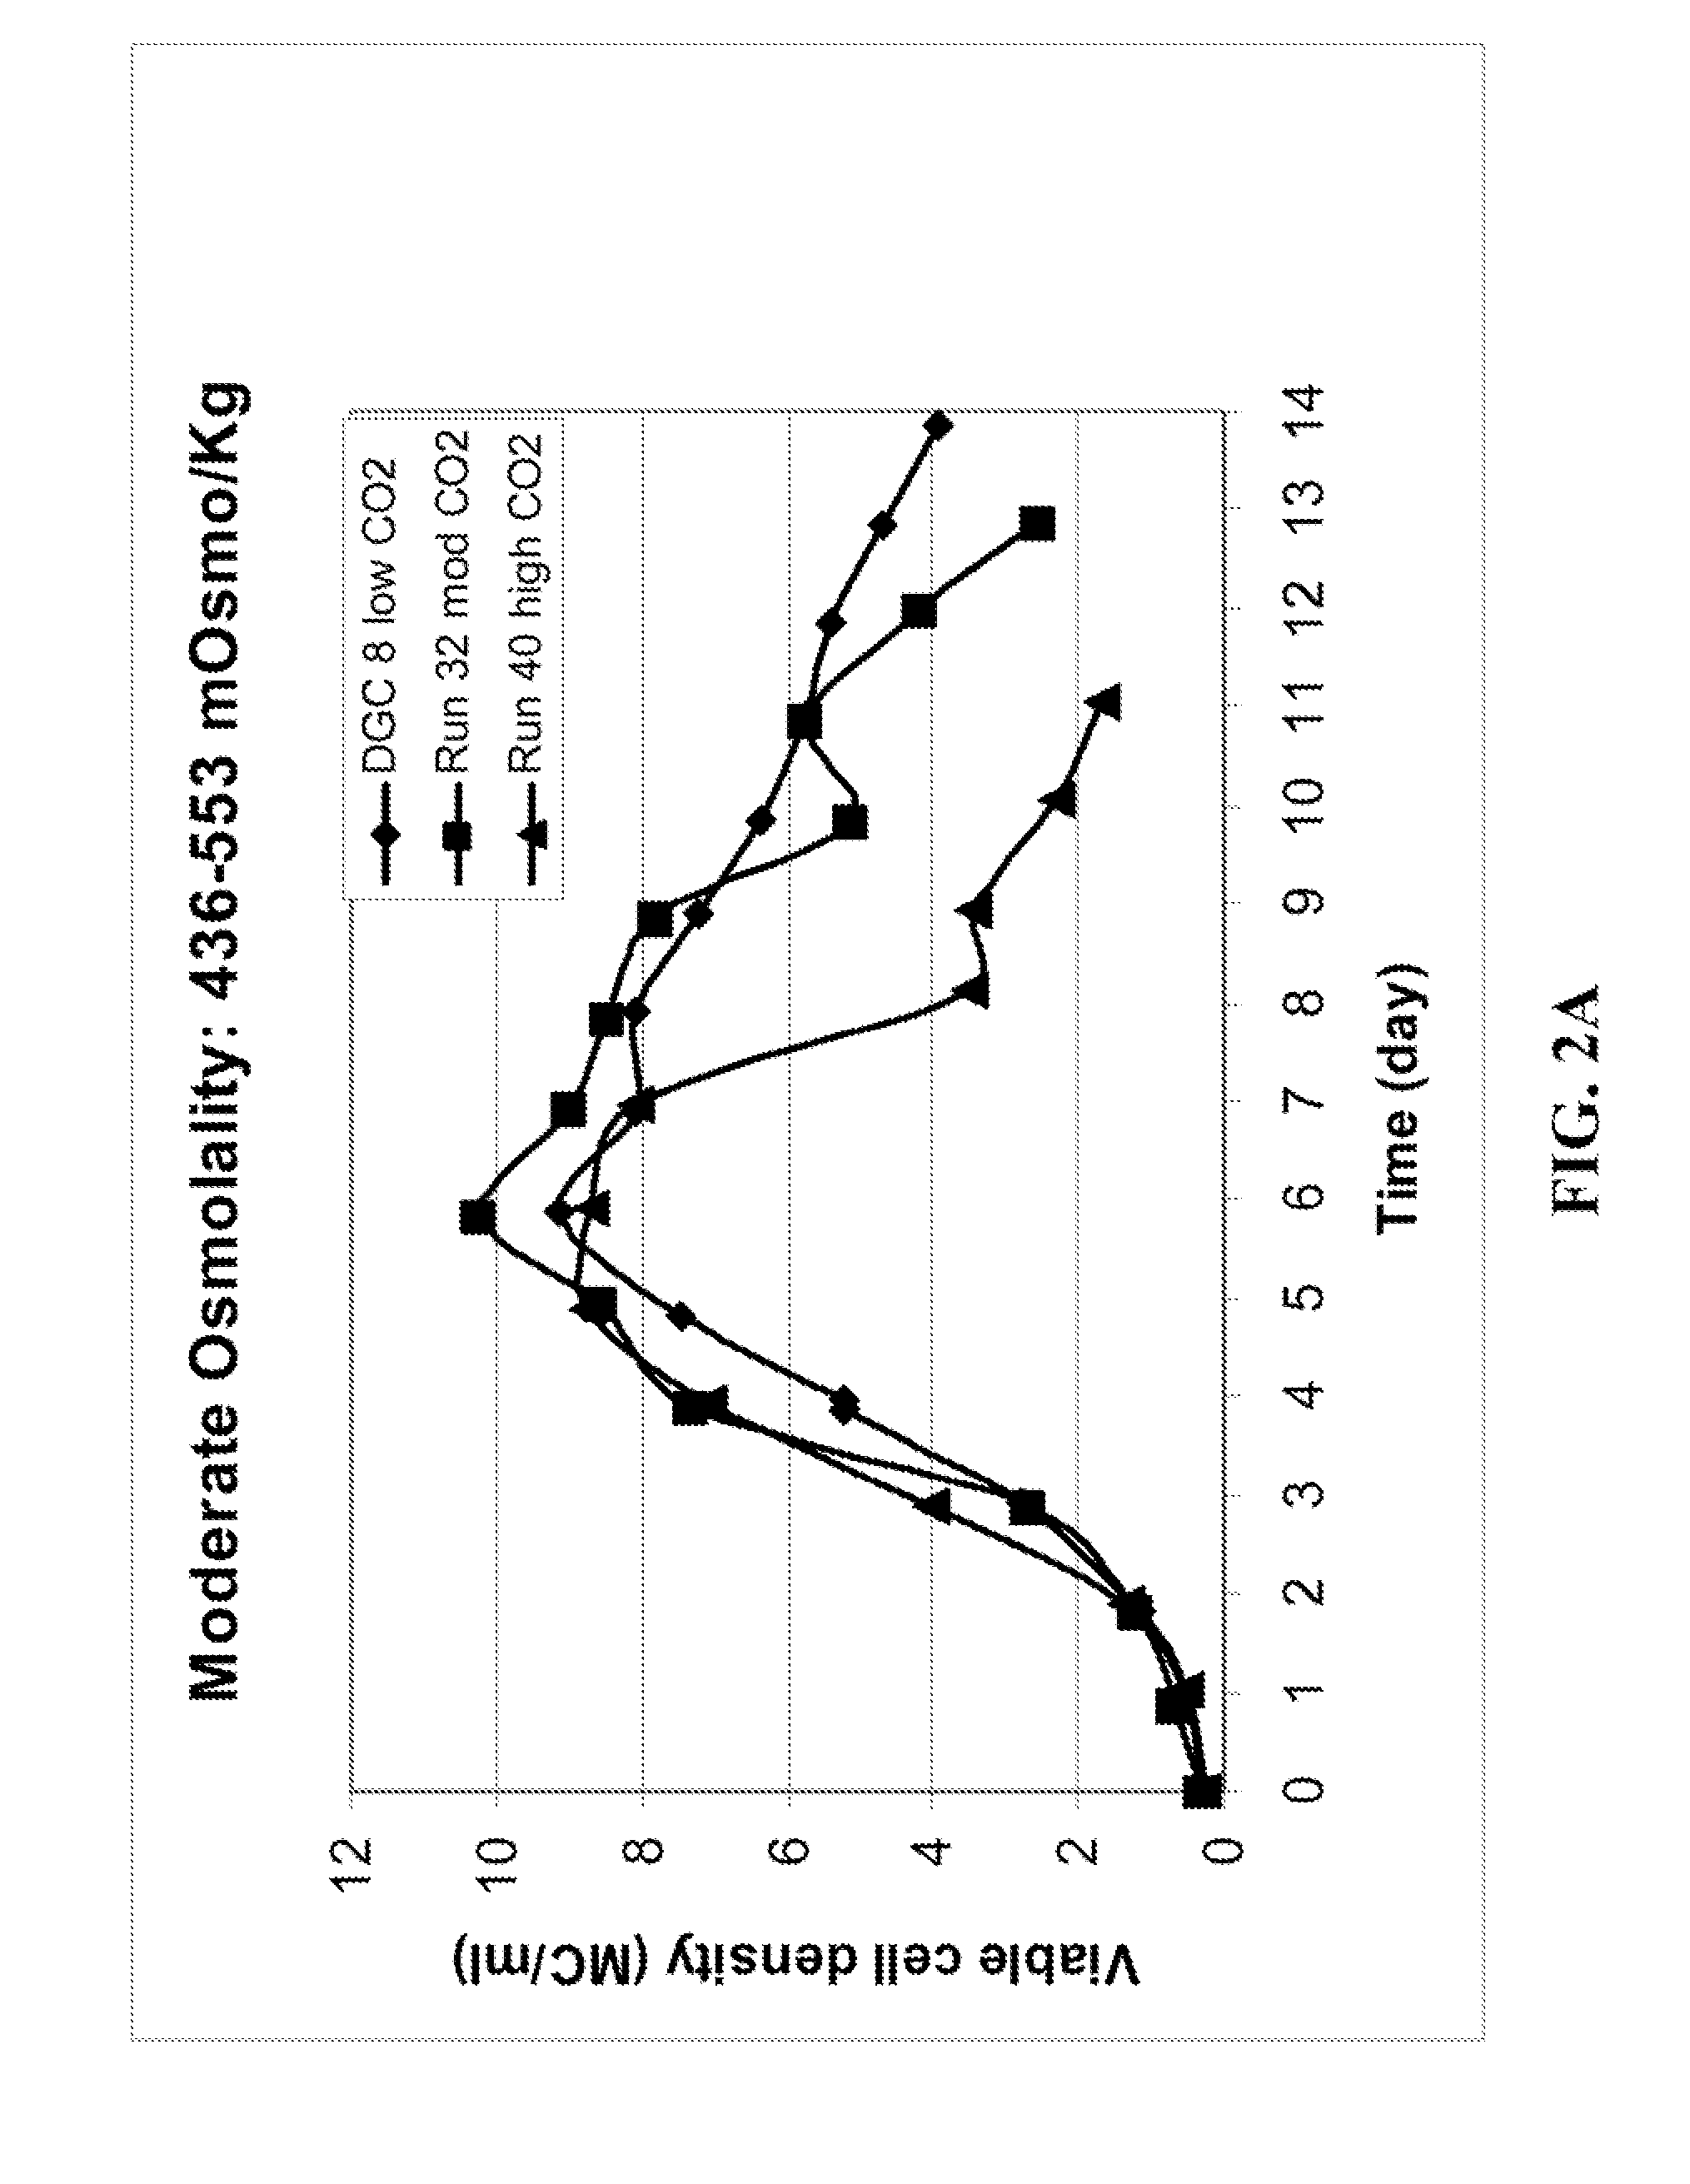 METHOD FOR CONTROLLING pH, OSMOLALITY AND DISSOLVED CARBON DIOXIDE LEVELS IN A MAMMALIAN CELL CULTURE PROCESS TO ENHANCE CELL VIABILITY AND BIOLOGIC PRODUCT YIELD